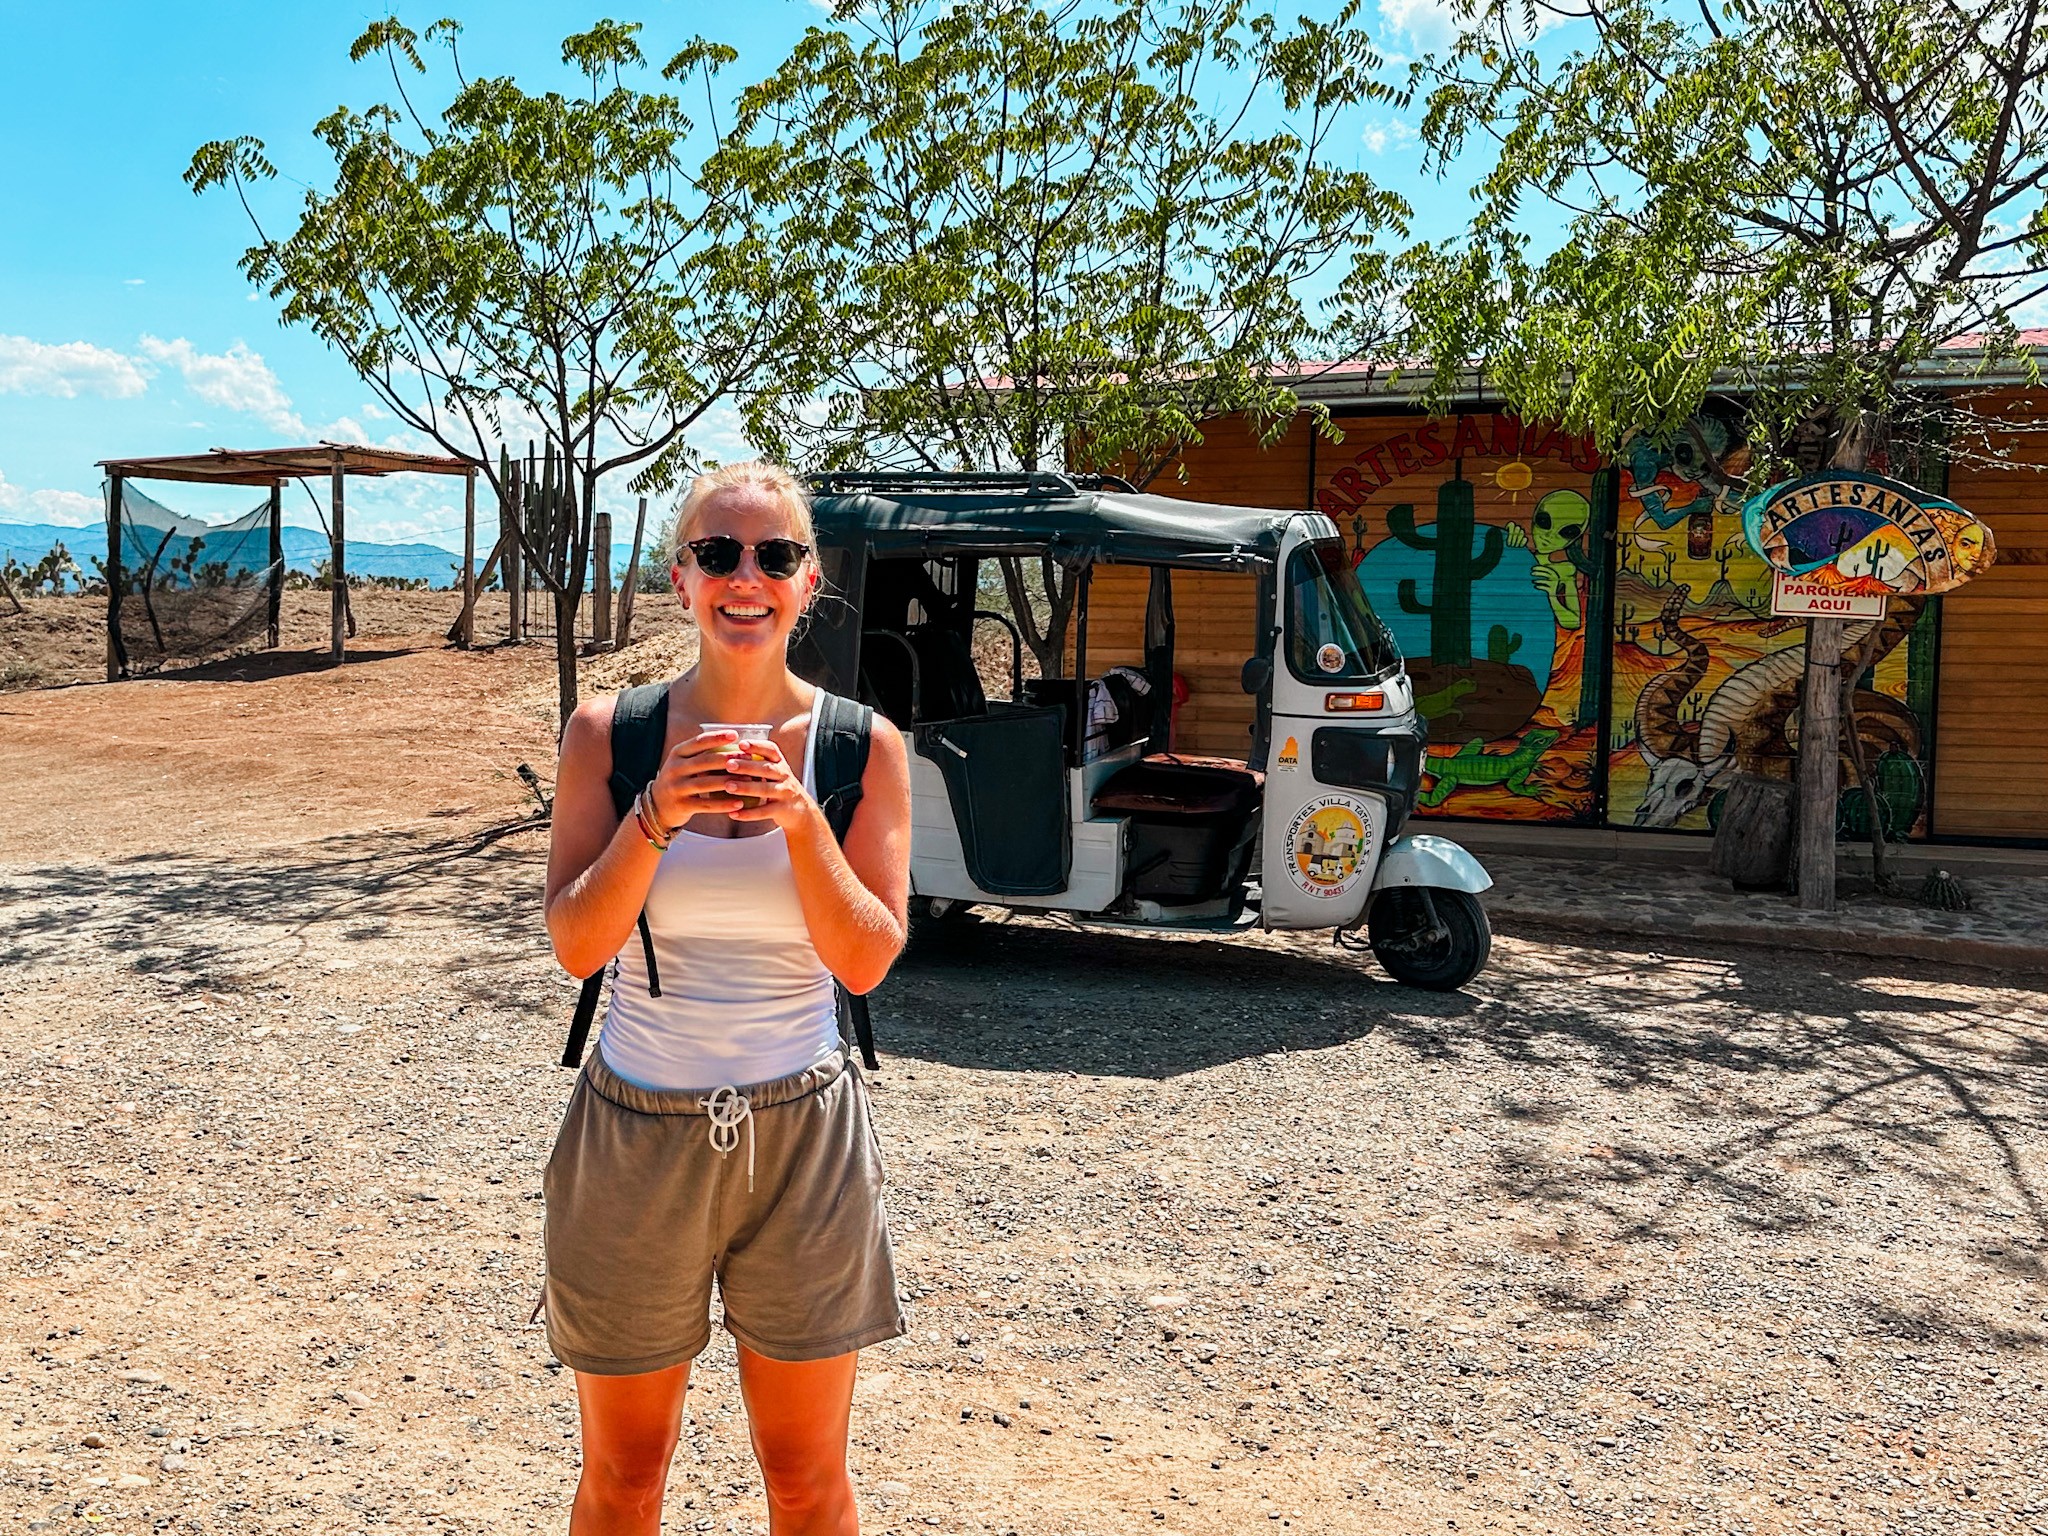 Visit the Tatacoa Desert - A Complete Guide: Drinking a refreshing Guarapo at the Red Desert